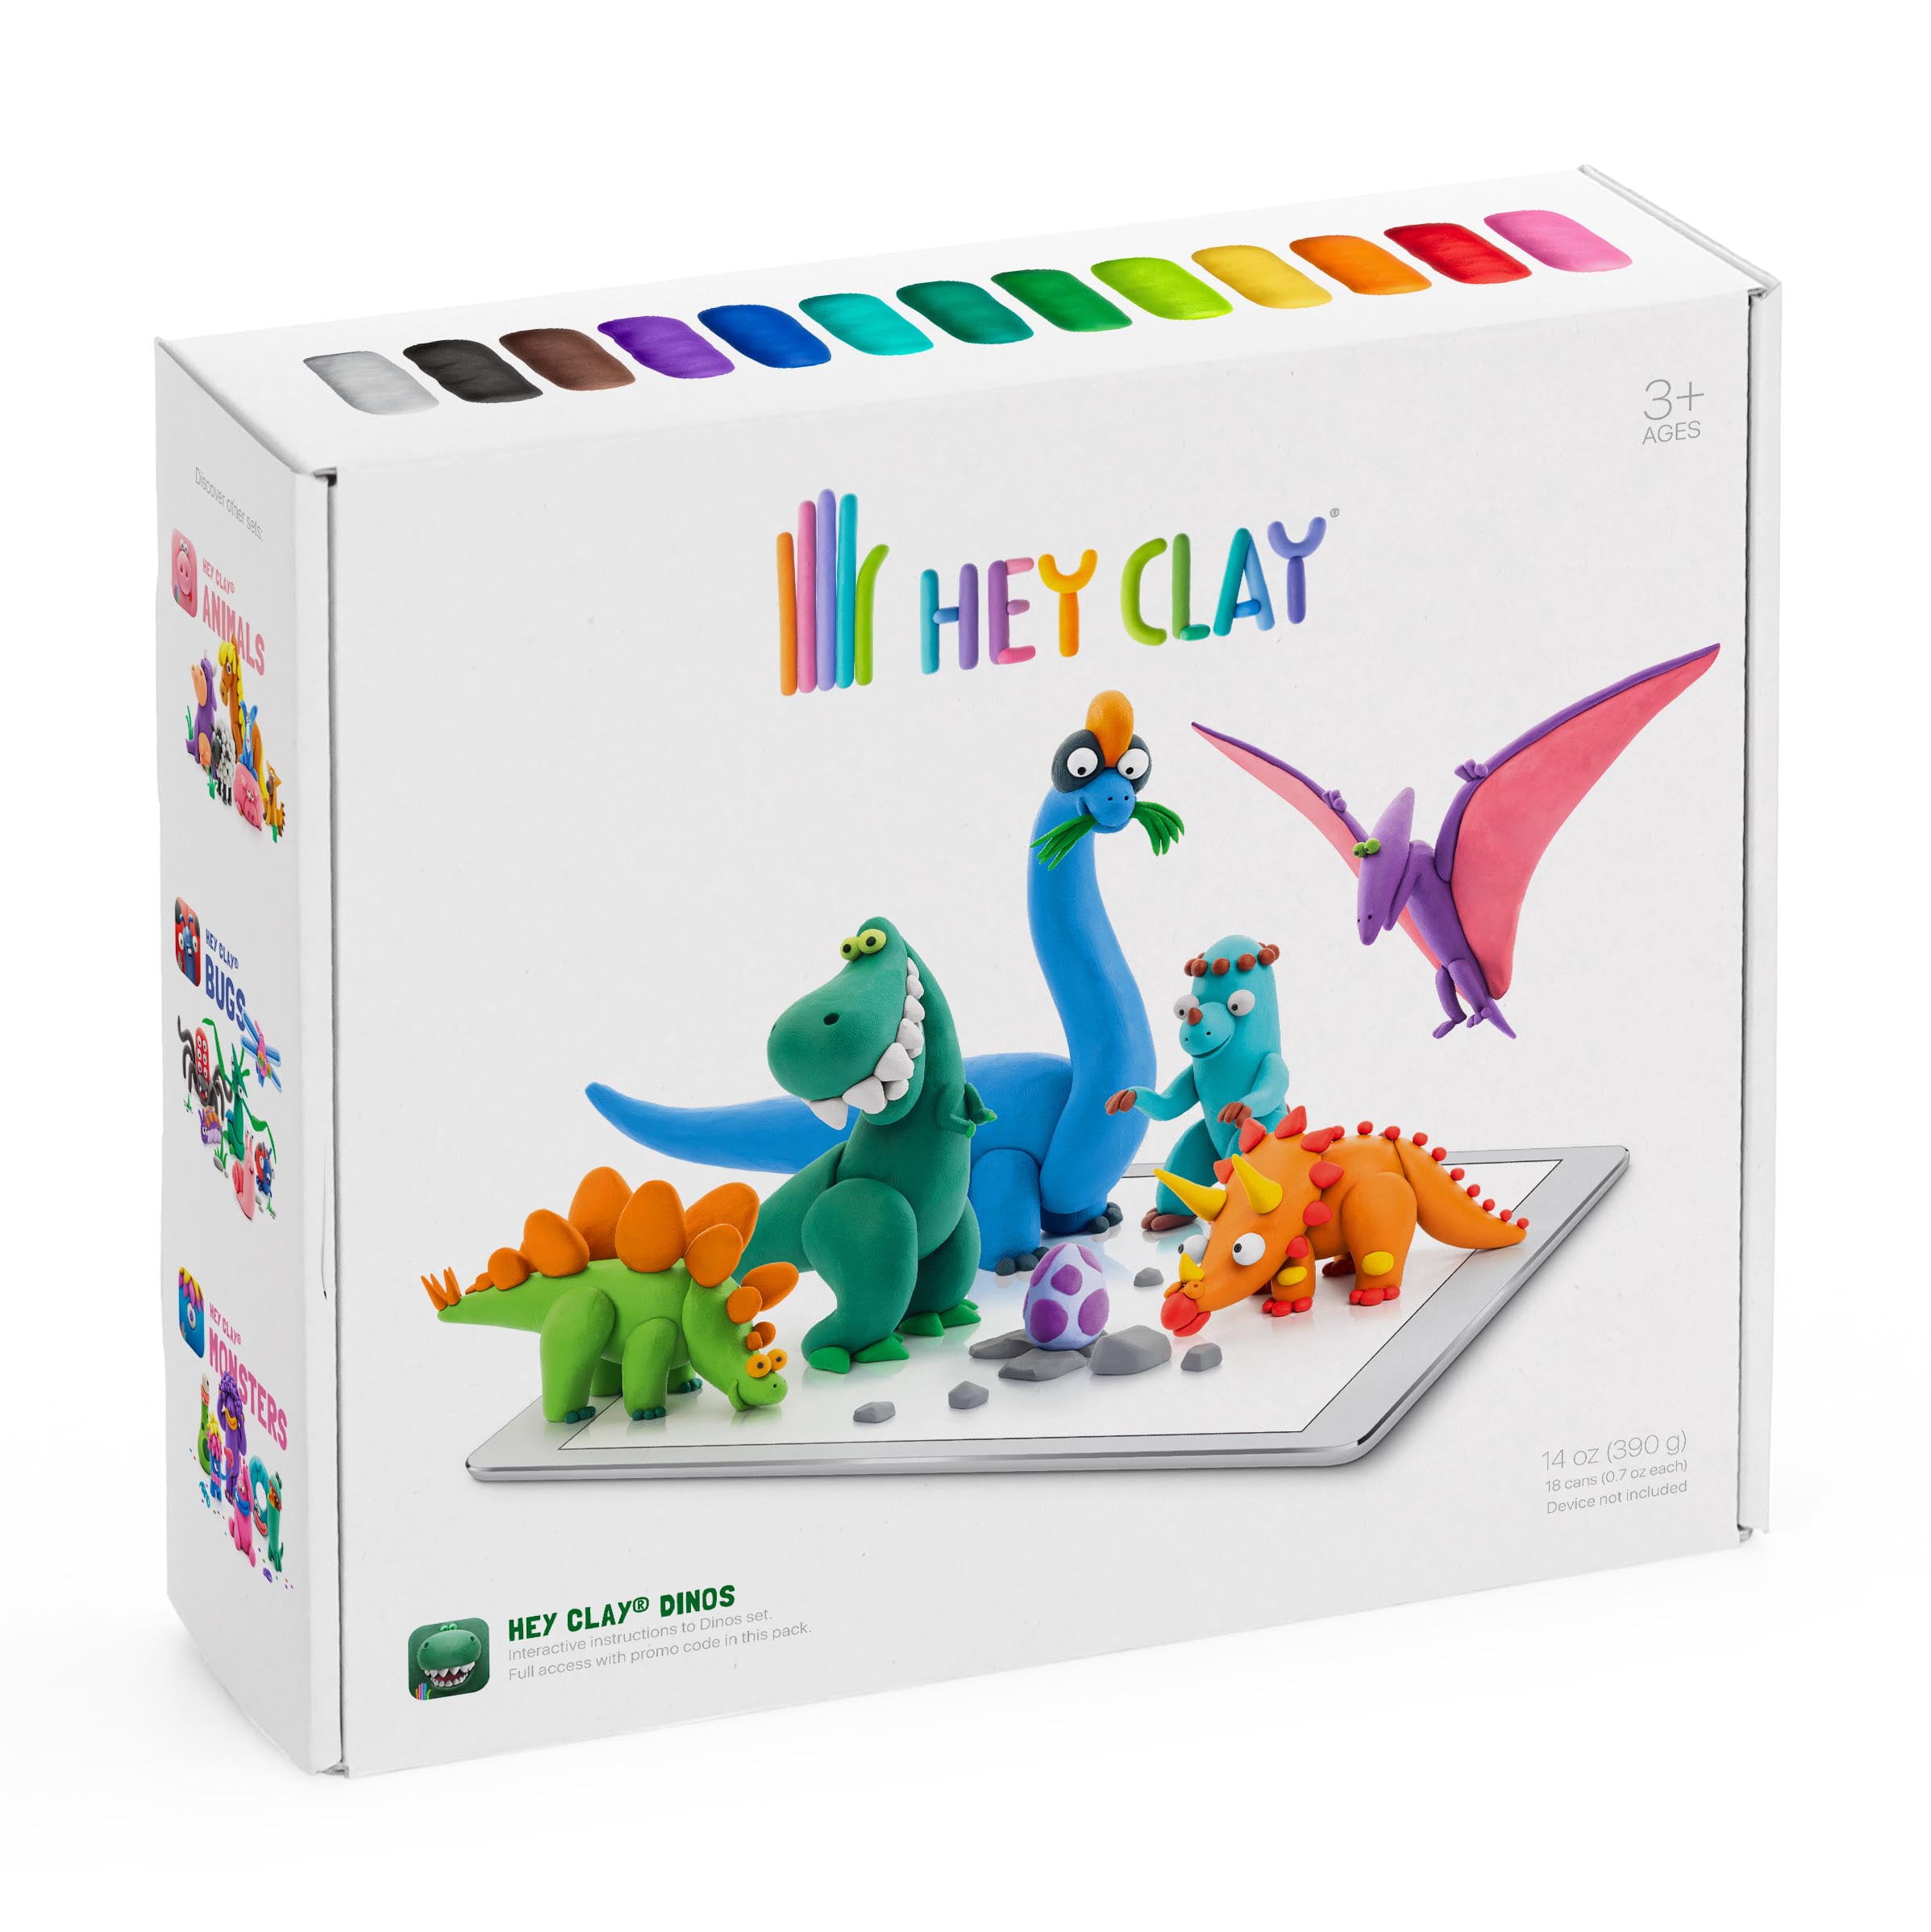 Hey clay Dinosaurs Series Box 18 Bottles Clear